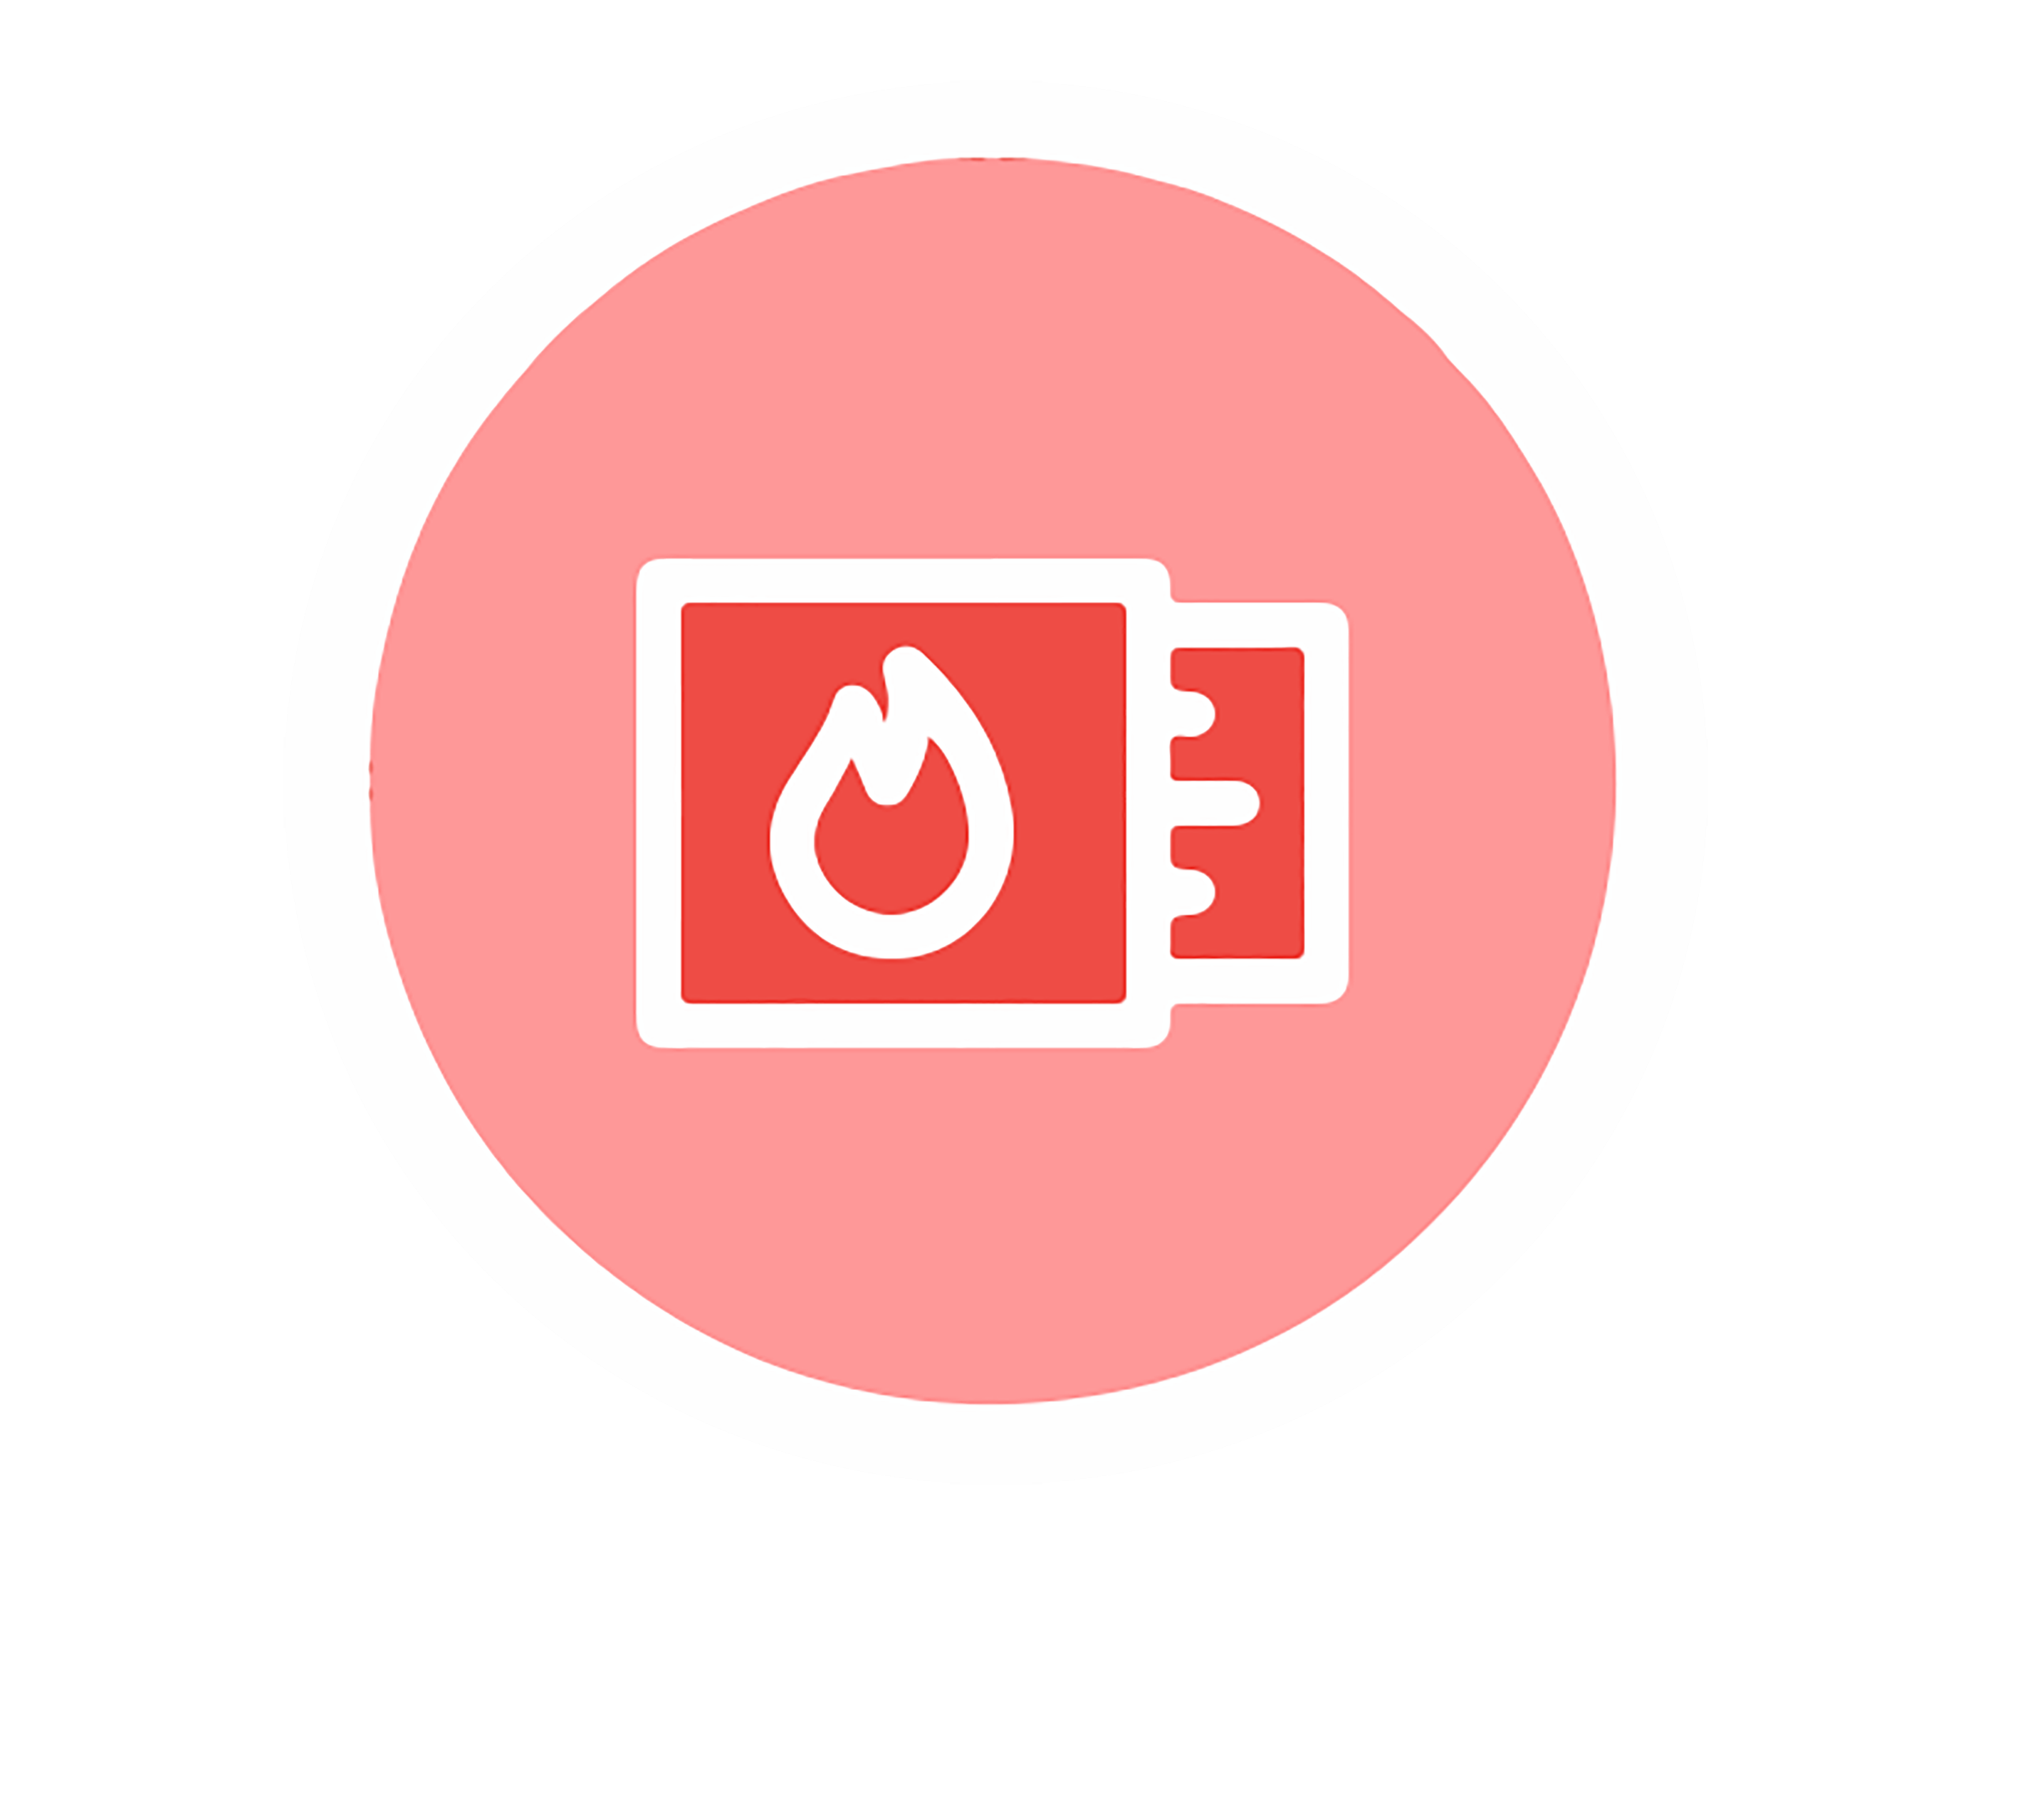 OH, WHAT A MATCH!